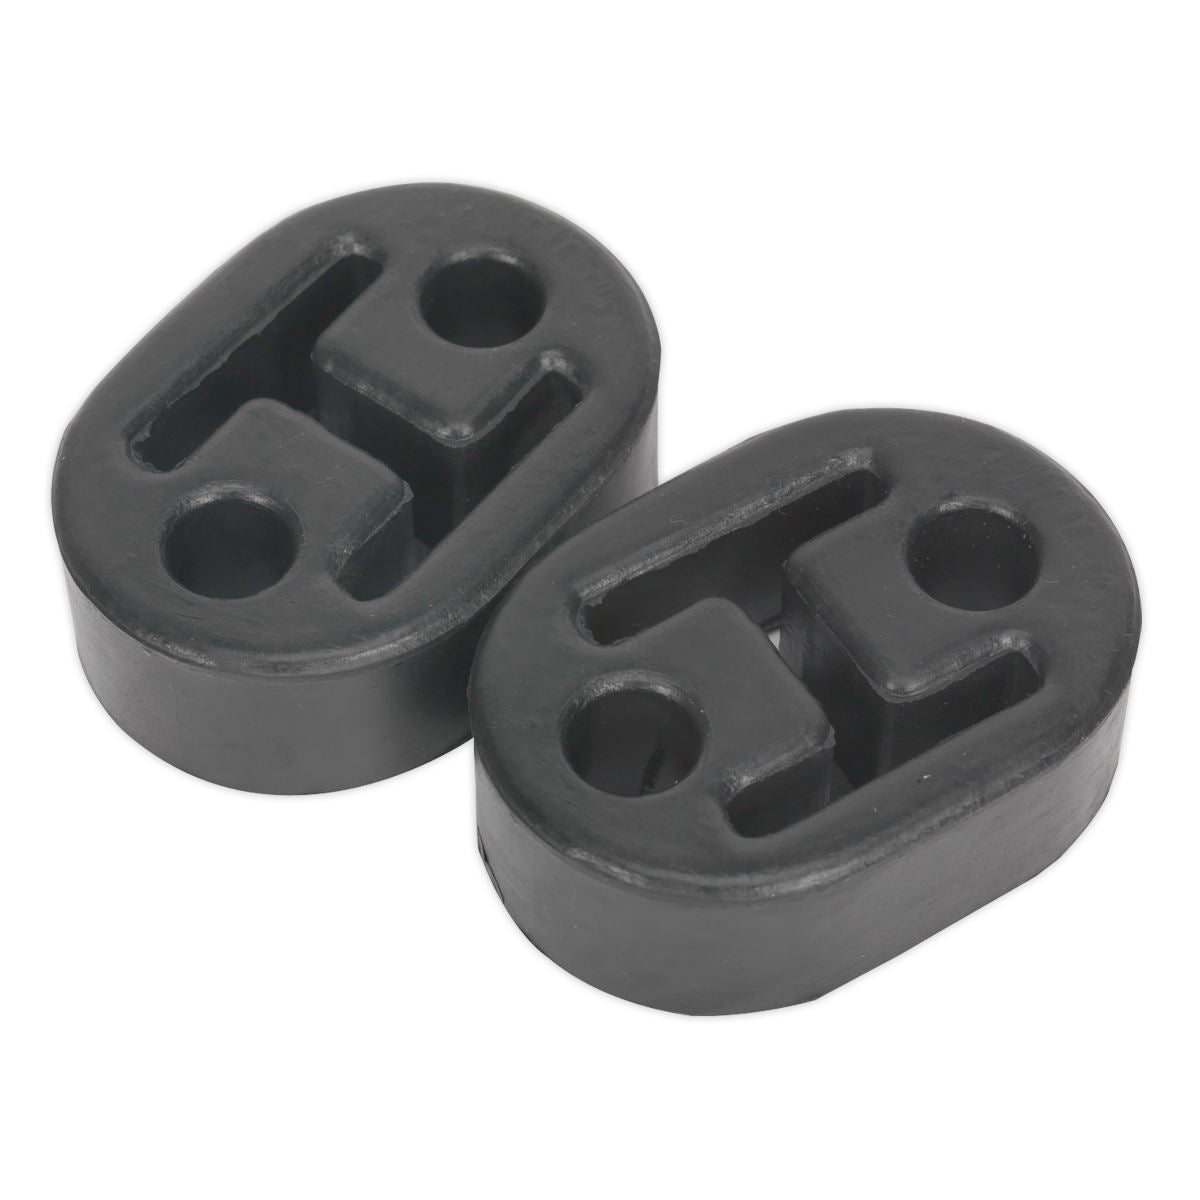 Sealey Exhaust Mounting Rubbers L60 x D41 x H20 (Pack of 2)